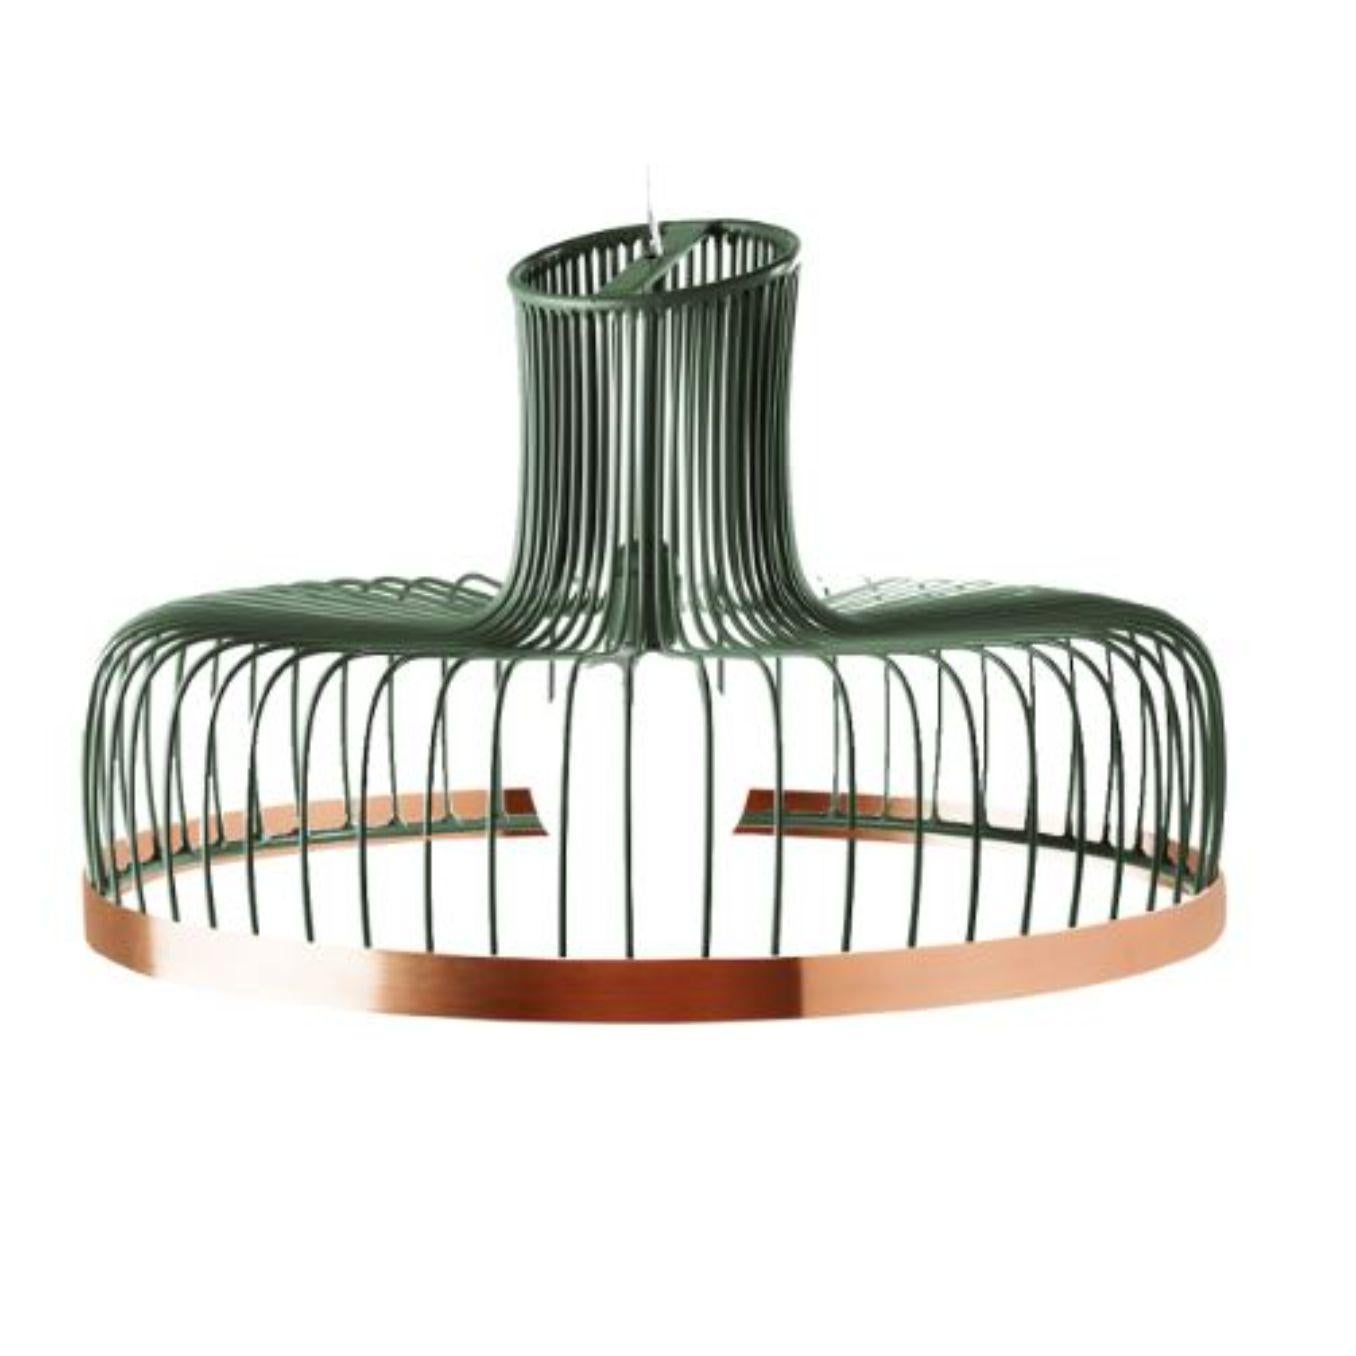 Moss new spider suspension lamp with copper ring by Dooq.
Dimensions: W 70 x D 70 x H 35 cm.
Materials: lacquered metal, polished or brushed metal, copper.
Also available in different colors and materials. 

Information:
230V/50Hz
E27/1x20W